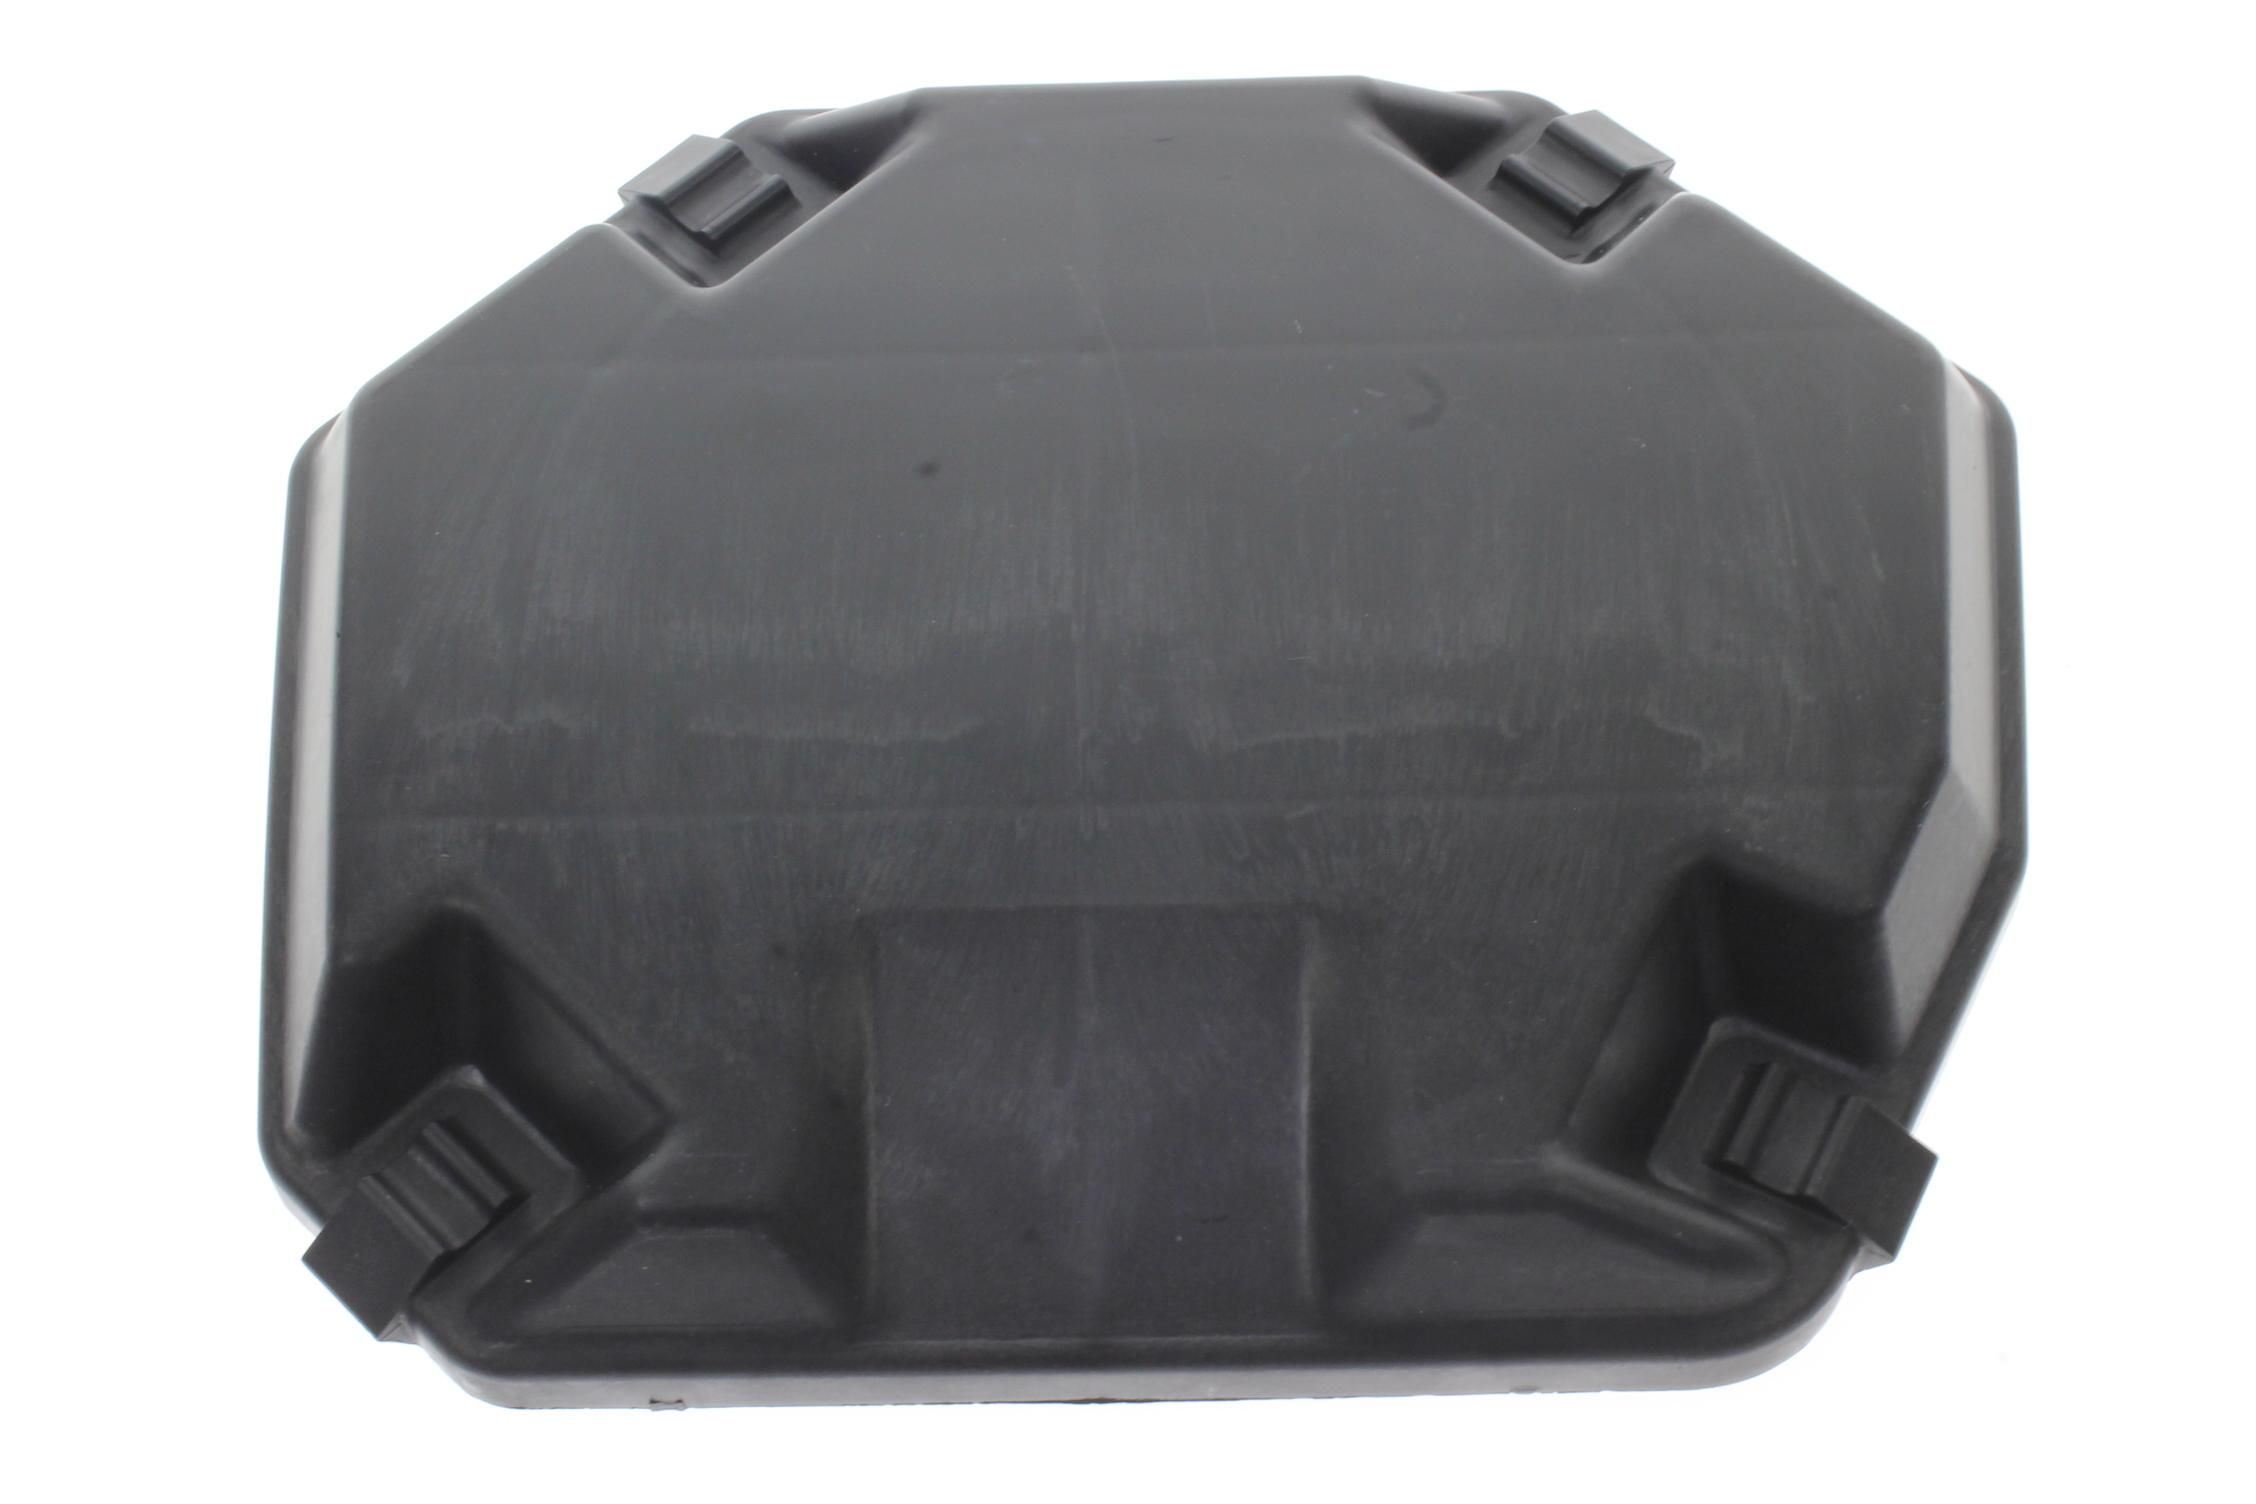 17217-HC4-000 AIR CLEANER HOUSING COVER